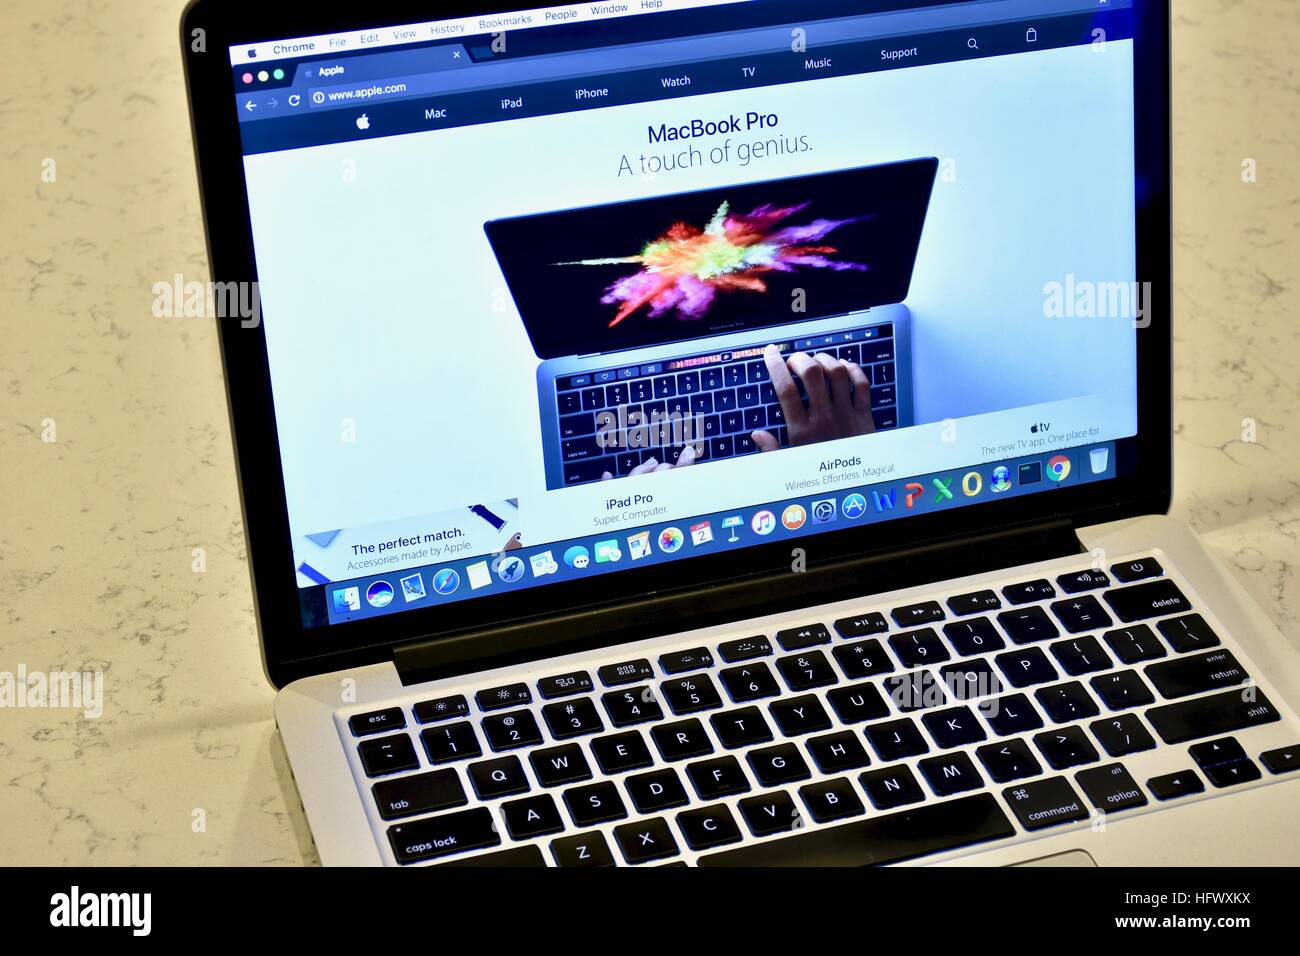 download chrome on macbook air